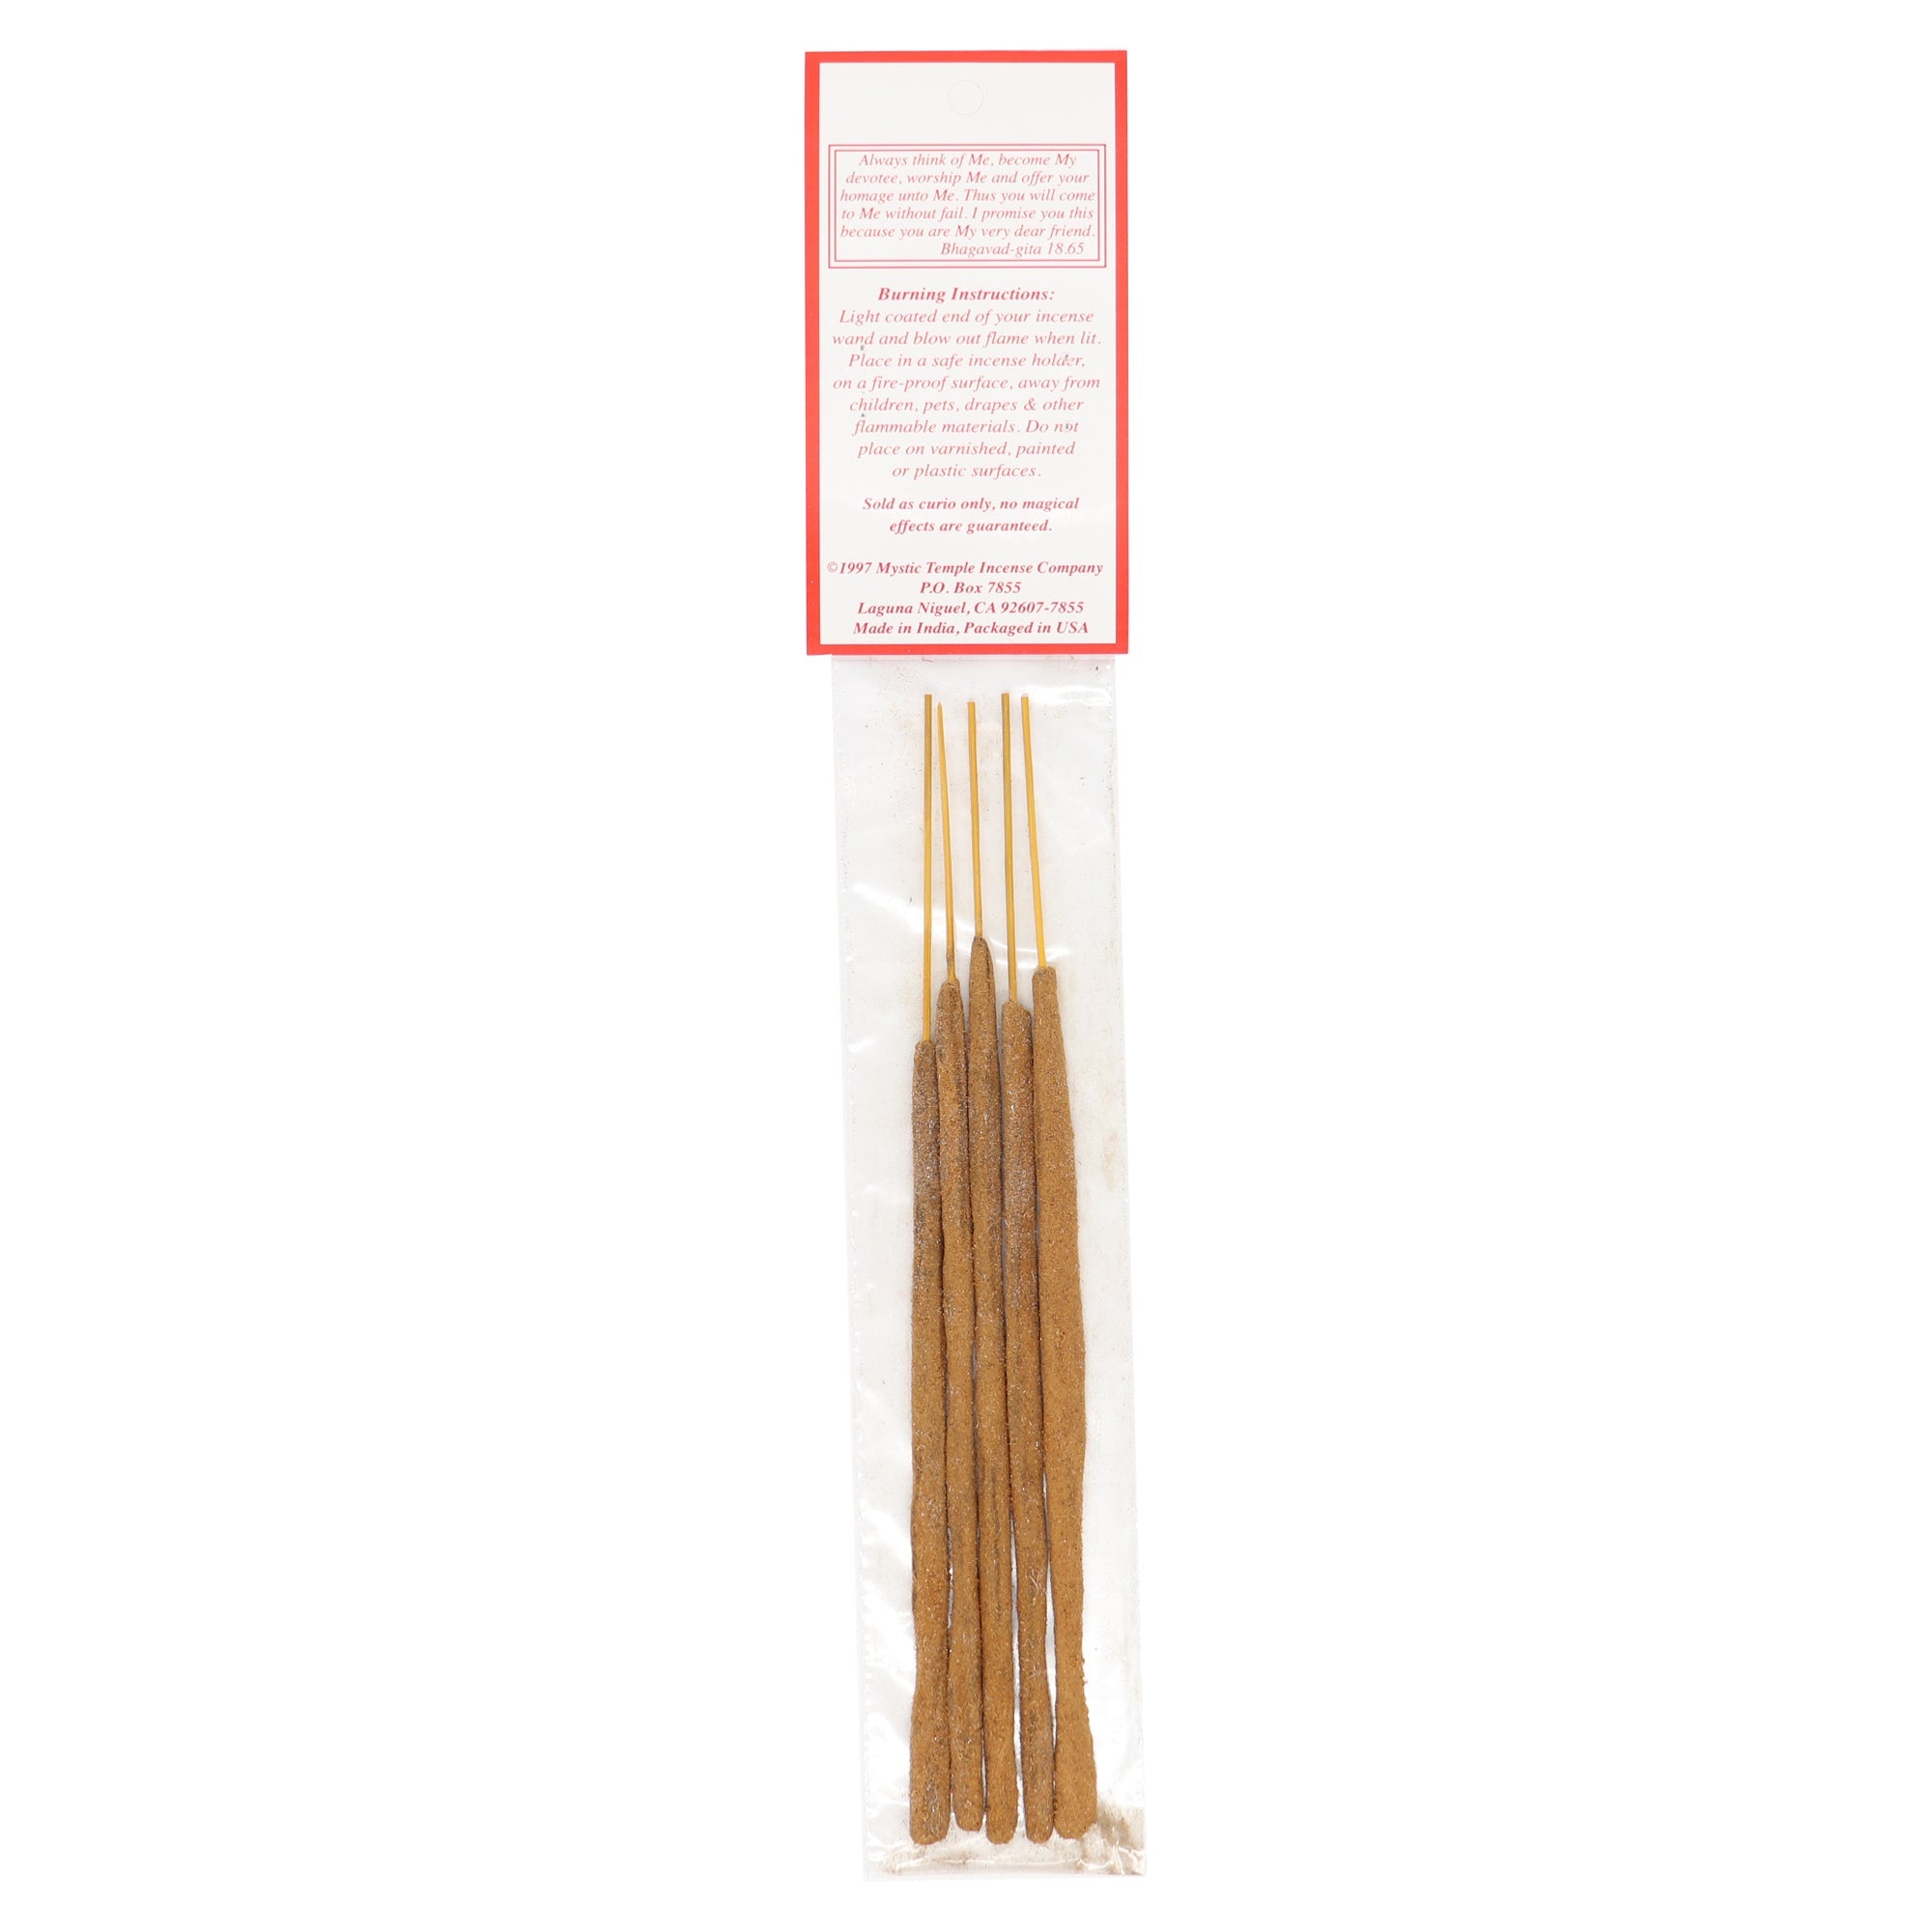 Golden Champa Incense - 13 Moons